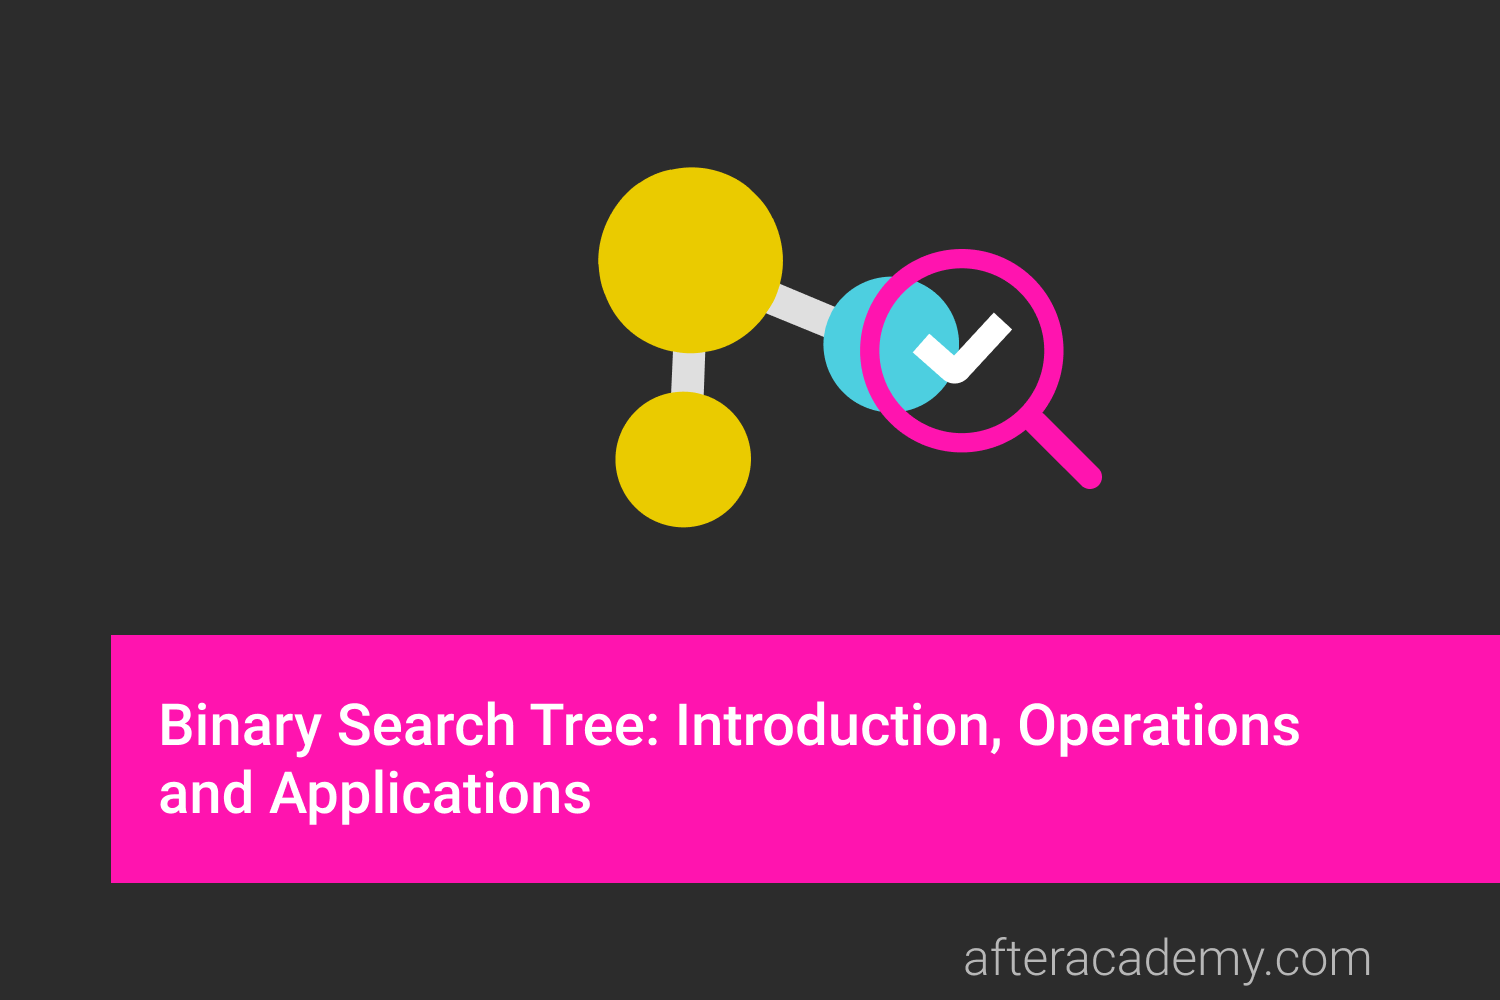 Binary Search Tree: Introduction, Operations and Applications